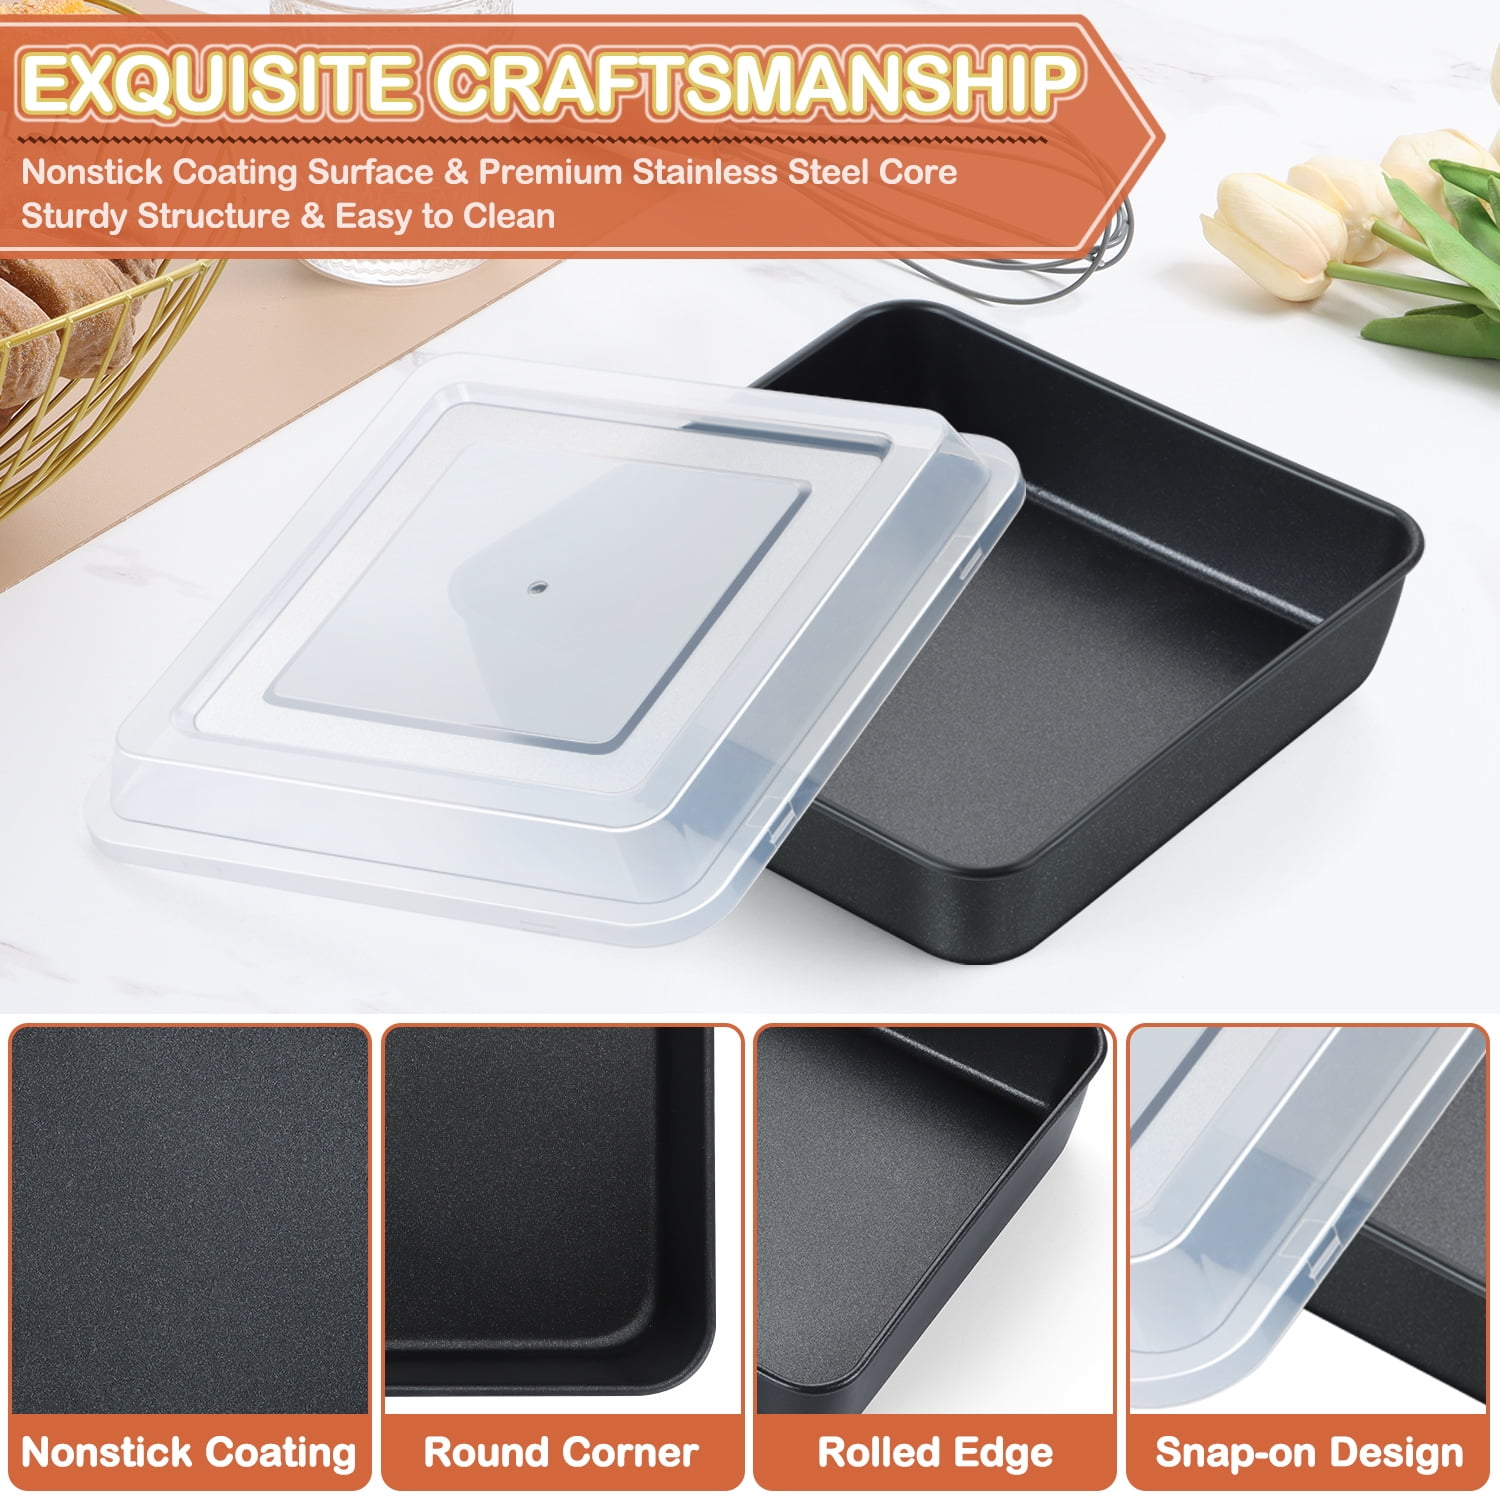 E-far 8x8 Inch Square Baking Pan with Lid Set, Nonstick Square Cake Pans  Metal Bakeware for Oven Cooking Lasagna Brownies, Stainless Steel Core &  Easy